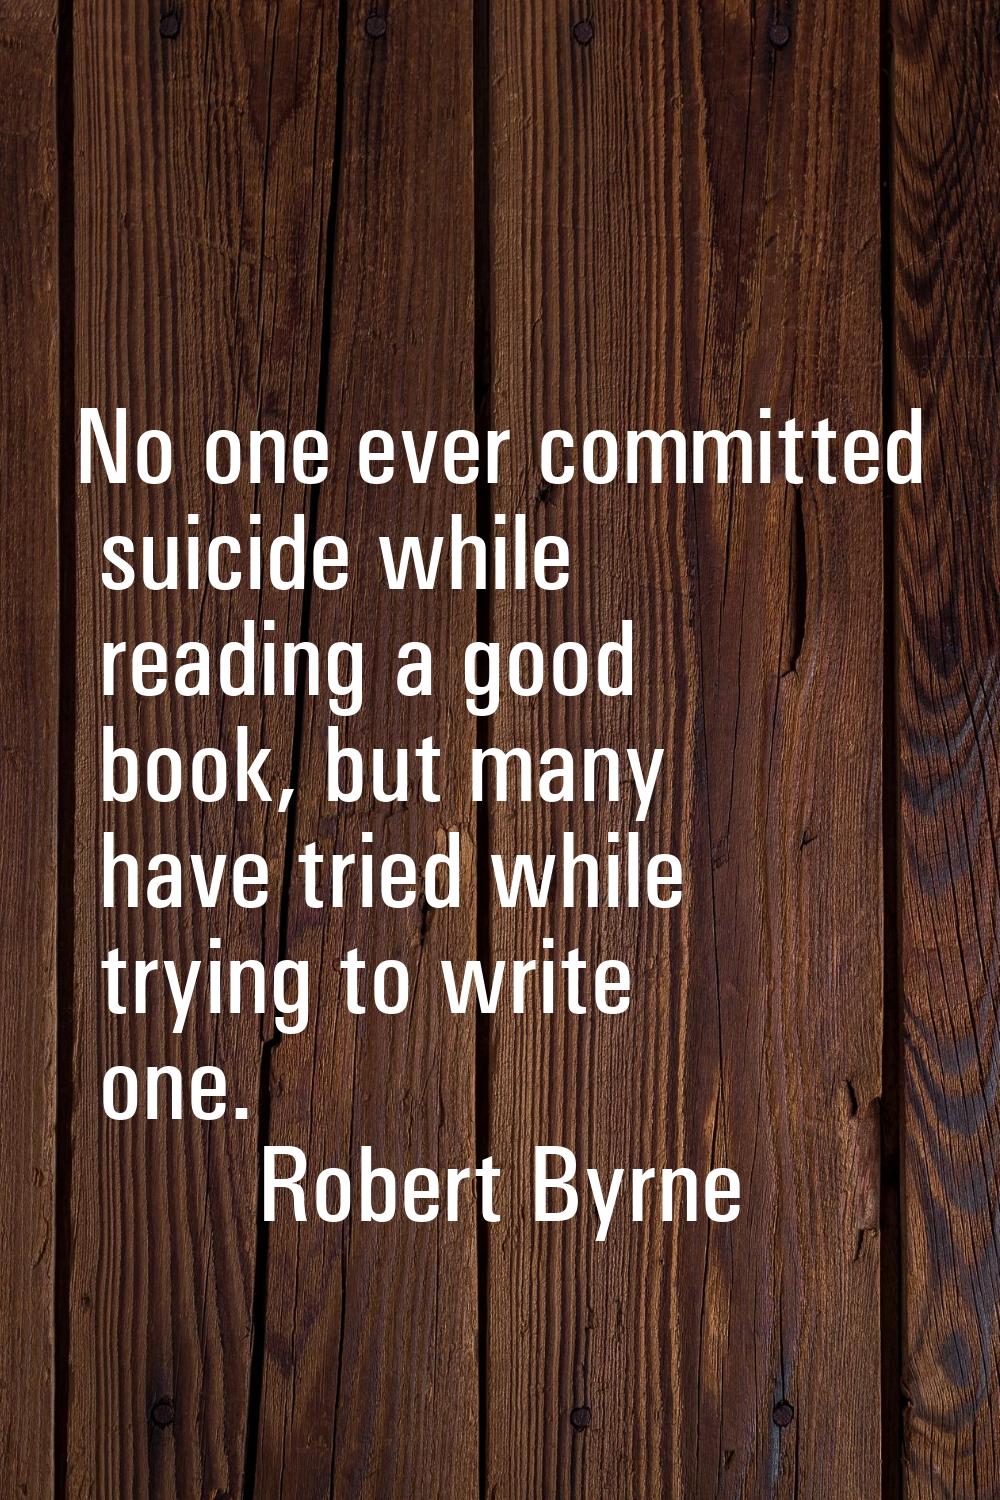 No one ever committed suicide while reading a good book, but many have tried while trying to write 